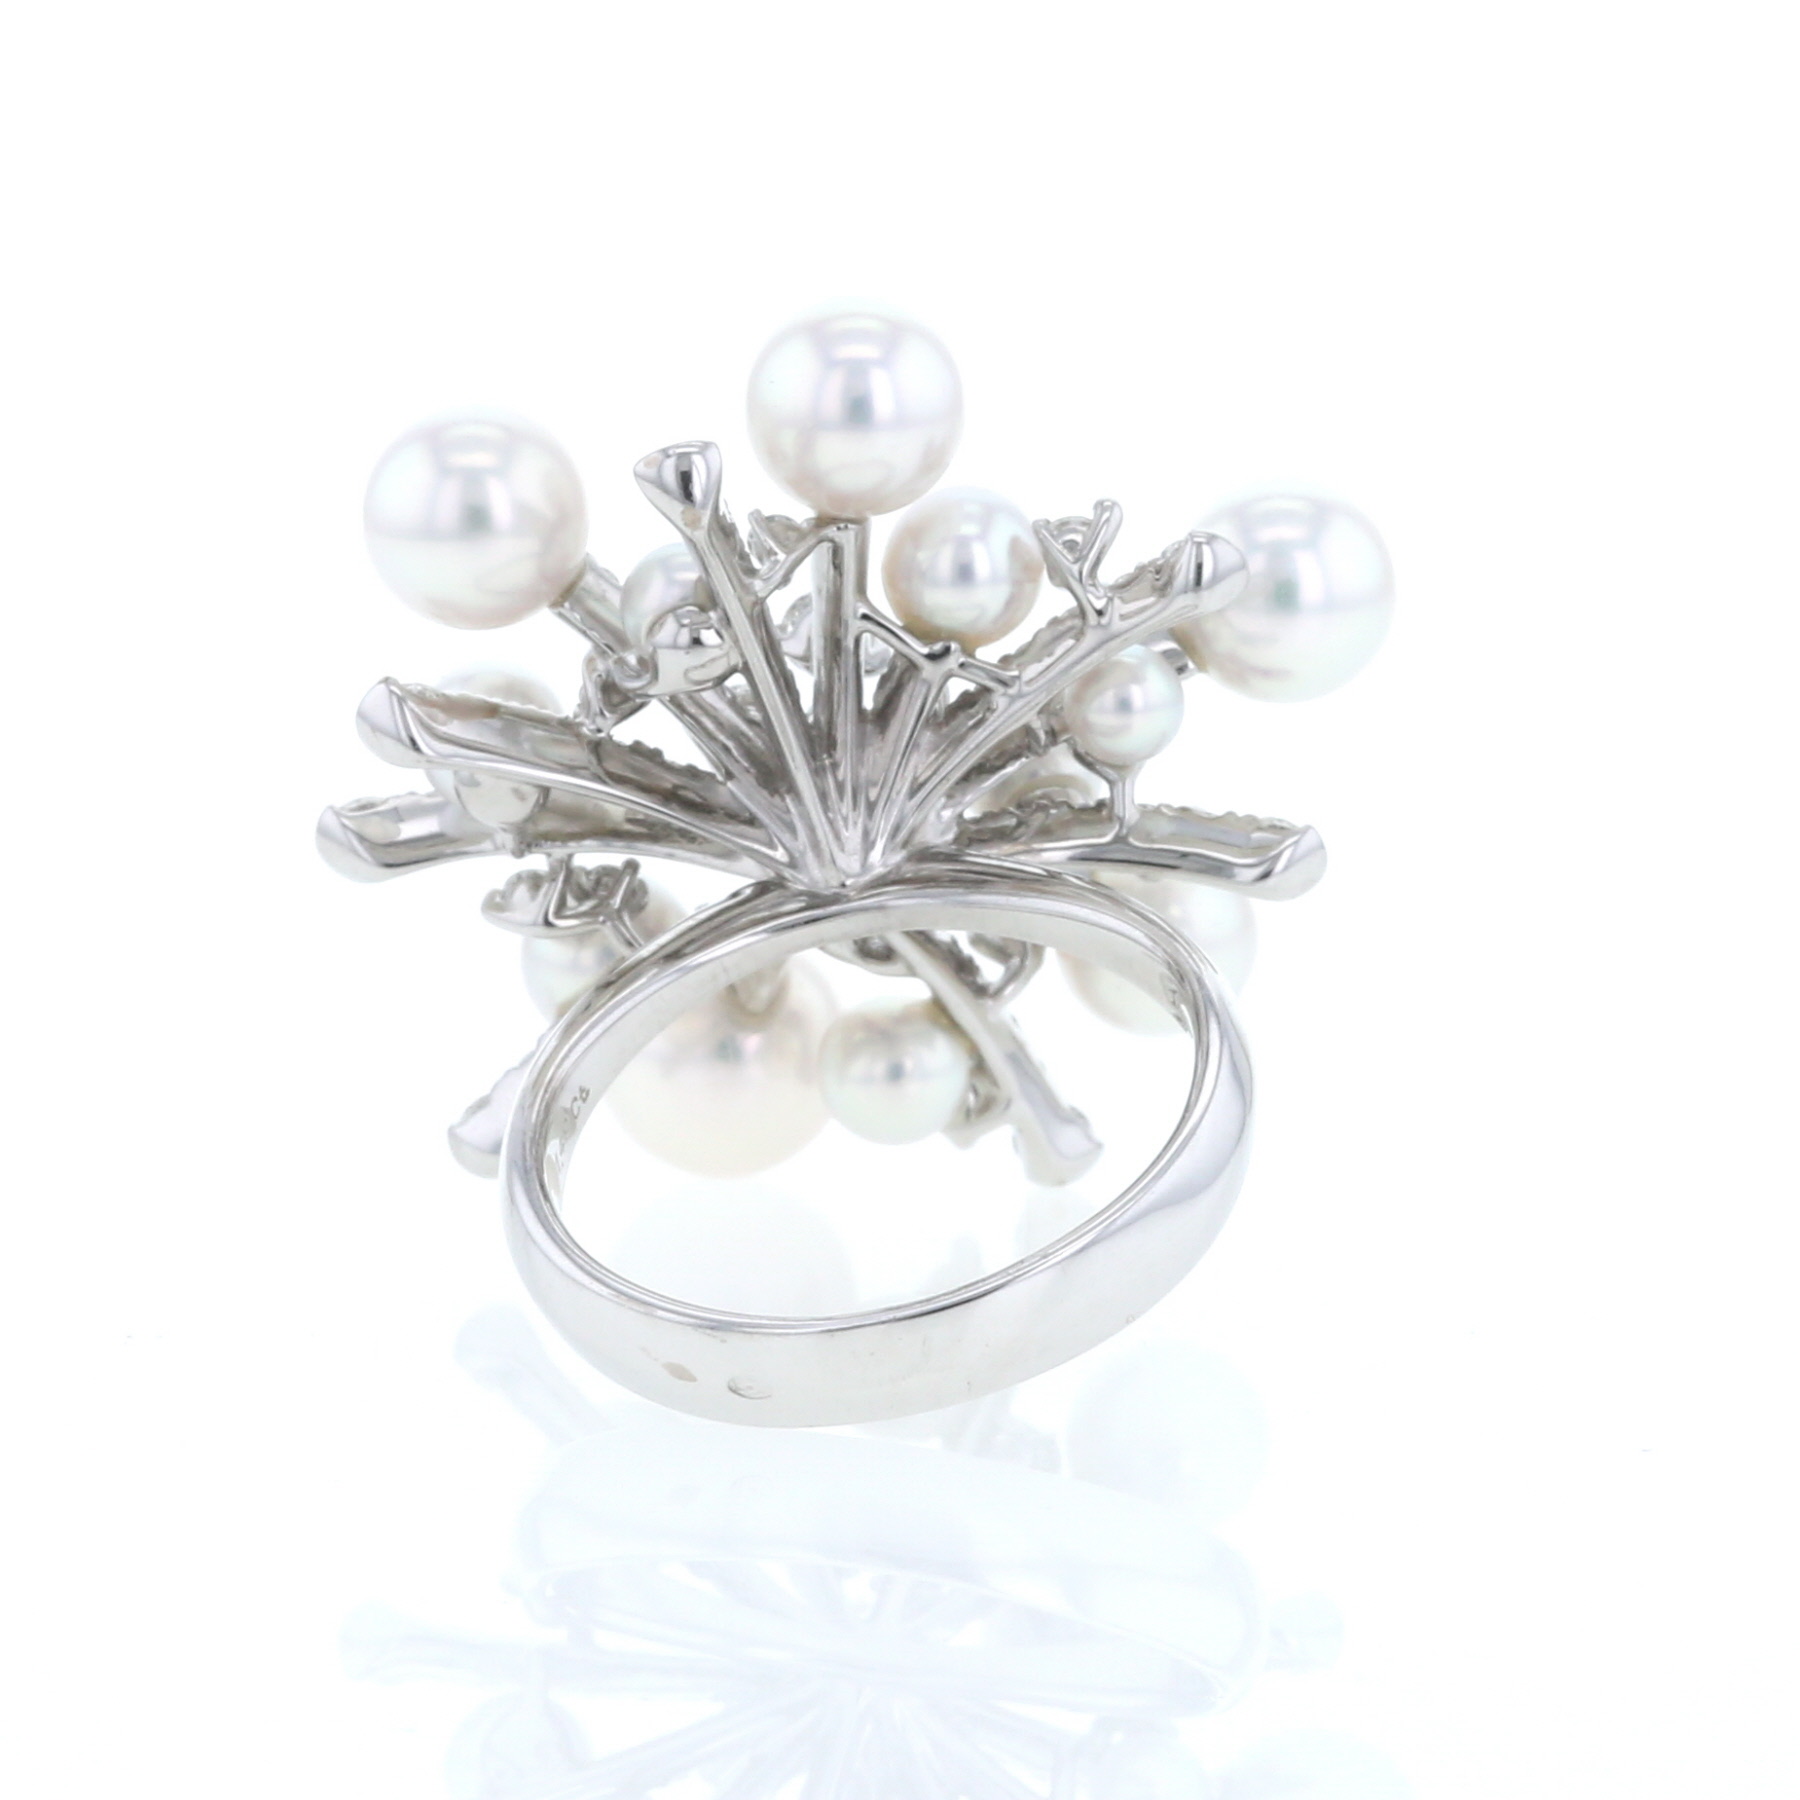 A World Of Creativity Ring In White Gold, Pearls And